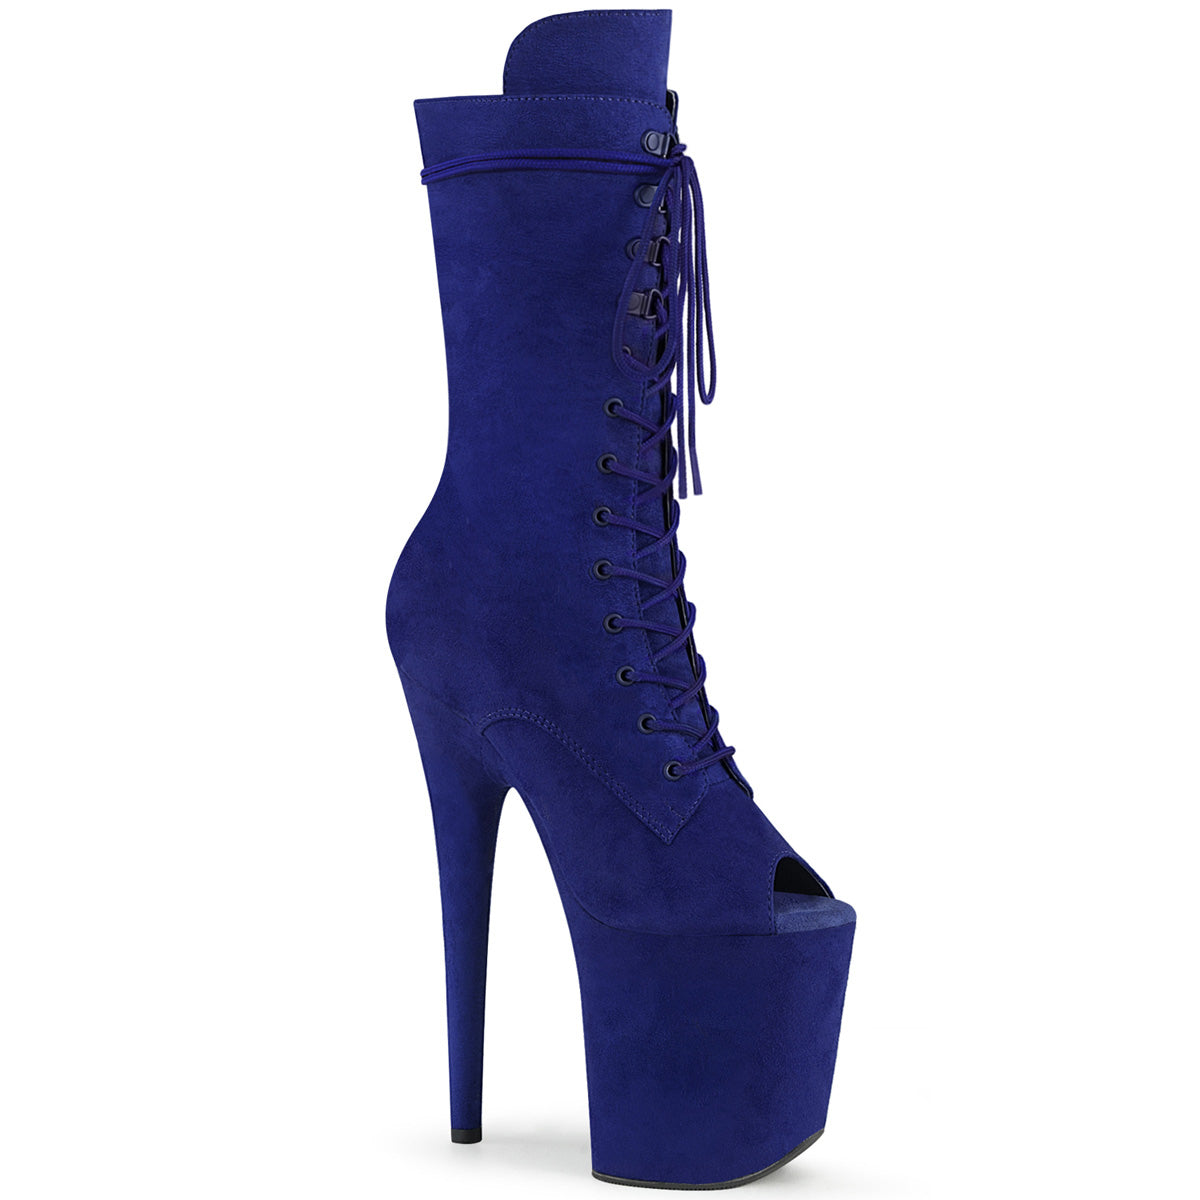 Pleaser Womens Ankle Boots FLAMINGO-1051FS Royal Blue Faux Suede/Royal Blue Faux Suede